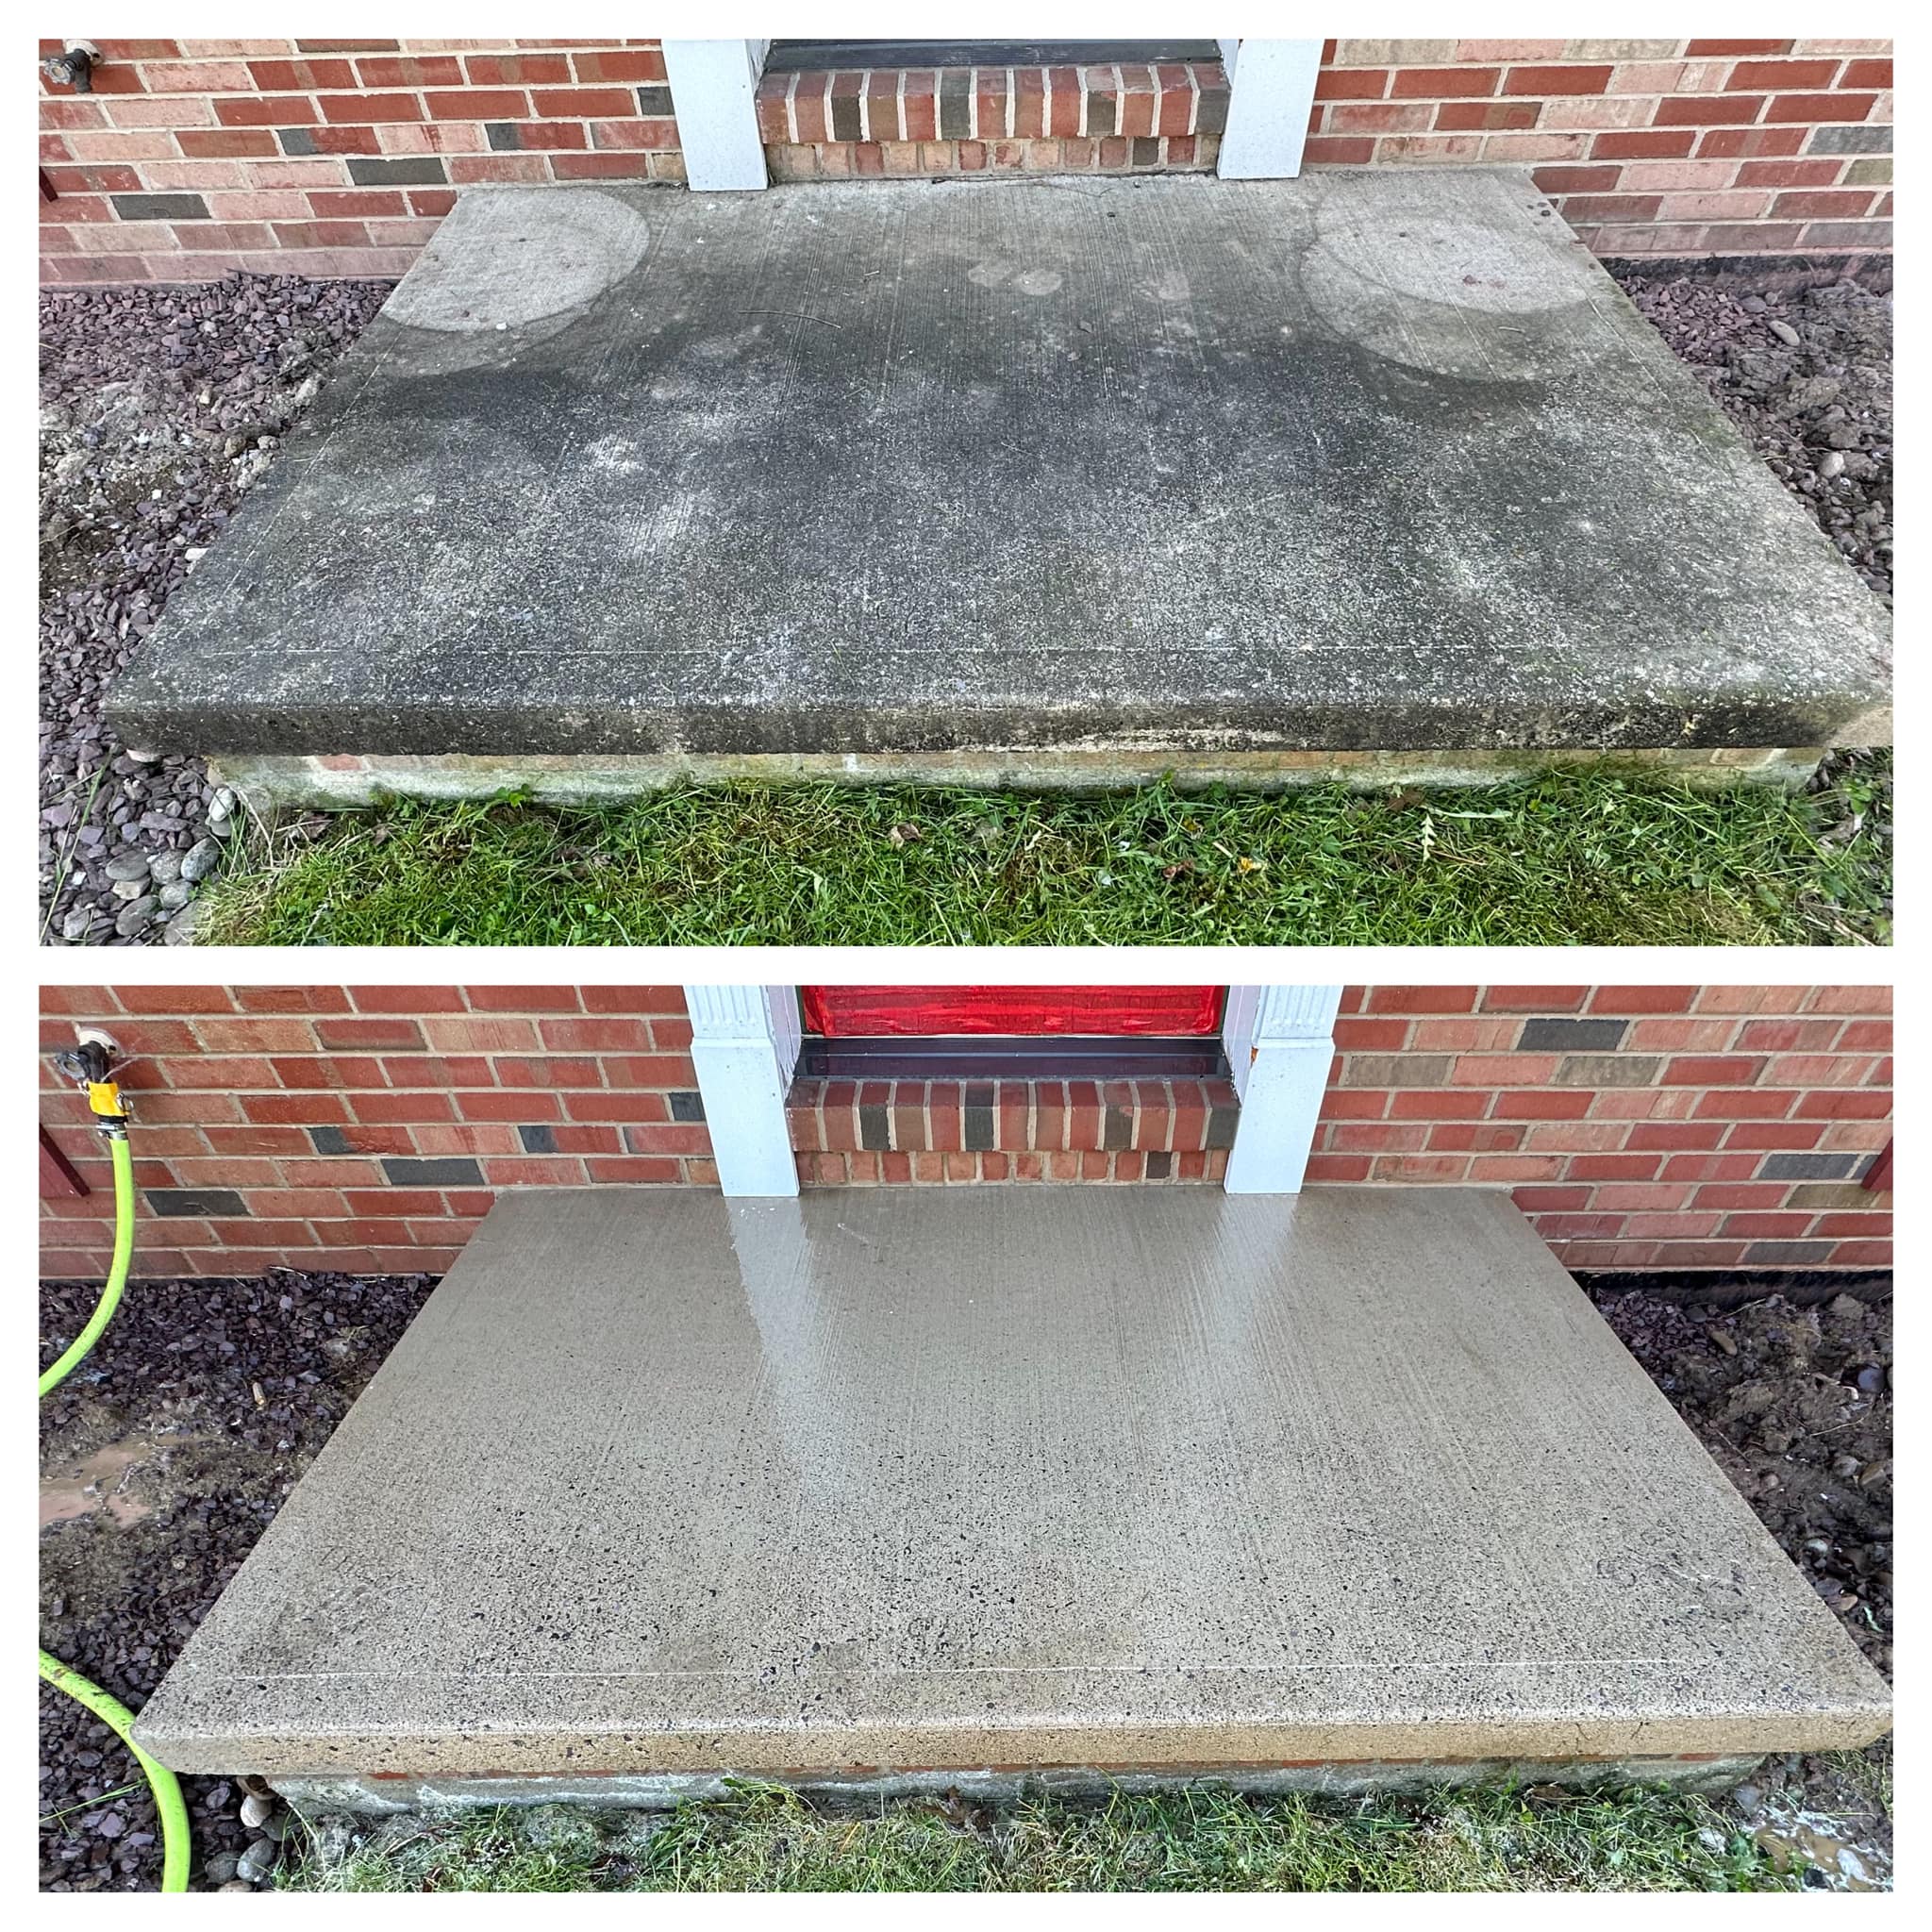 Top Rated Power Washing Services in Selinsgrove PA by NextGen Power Wash LLC